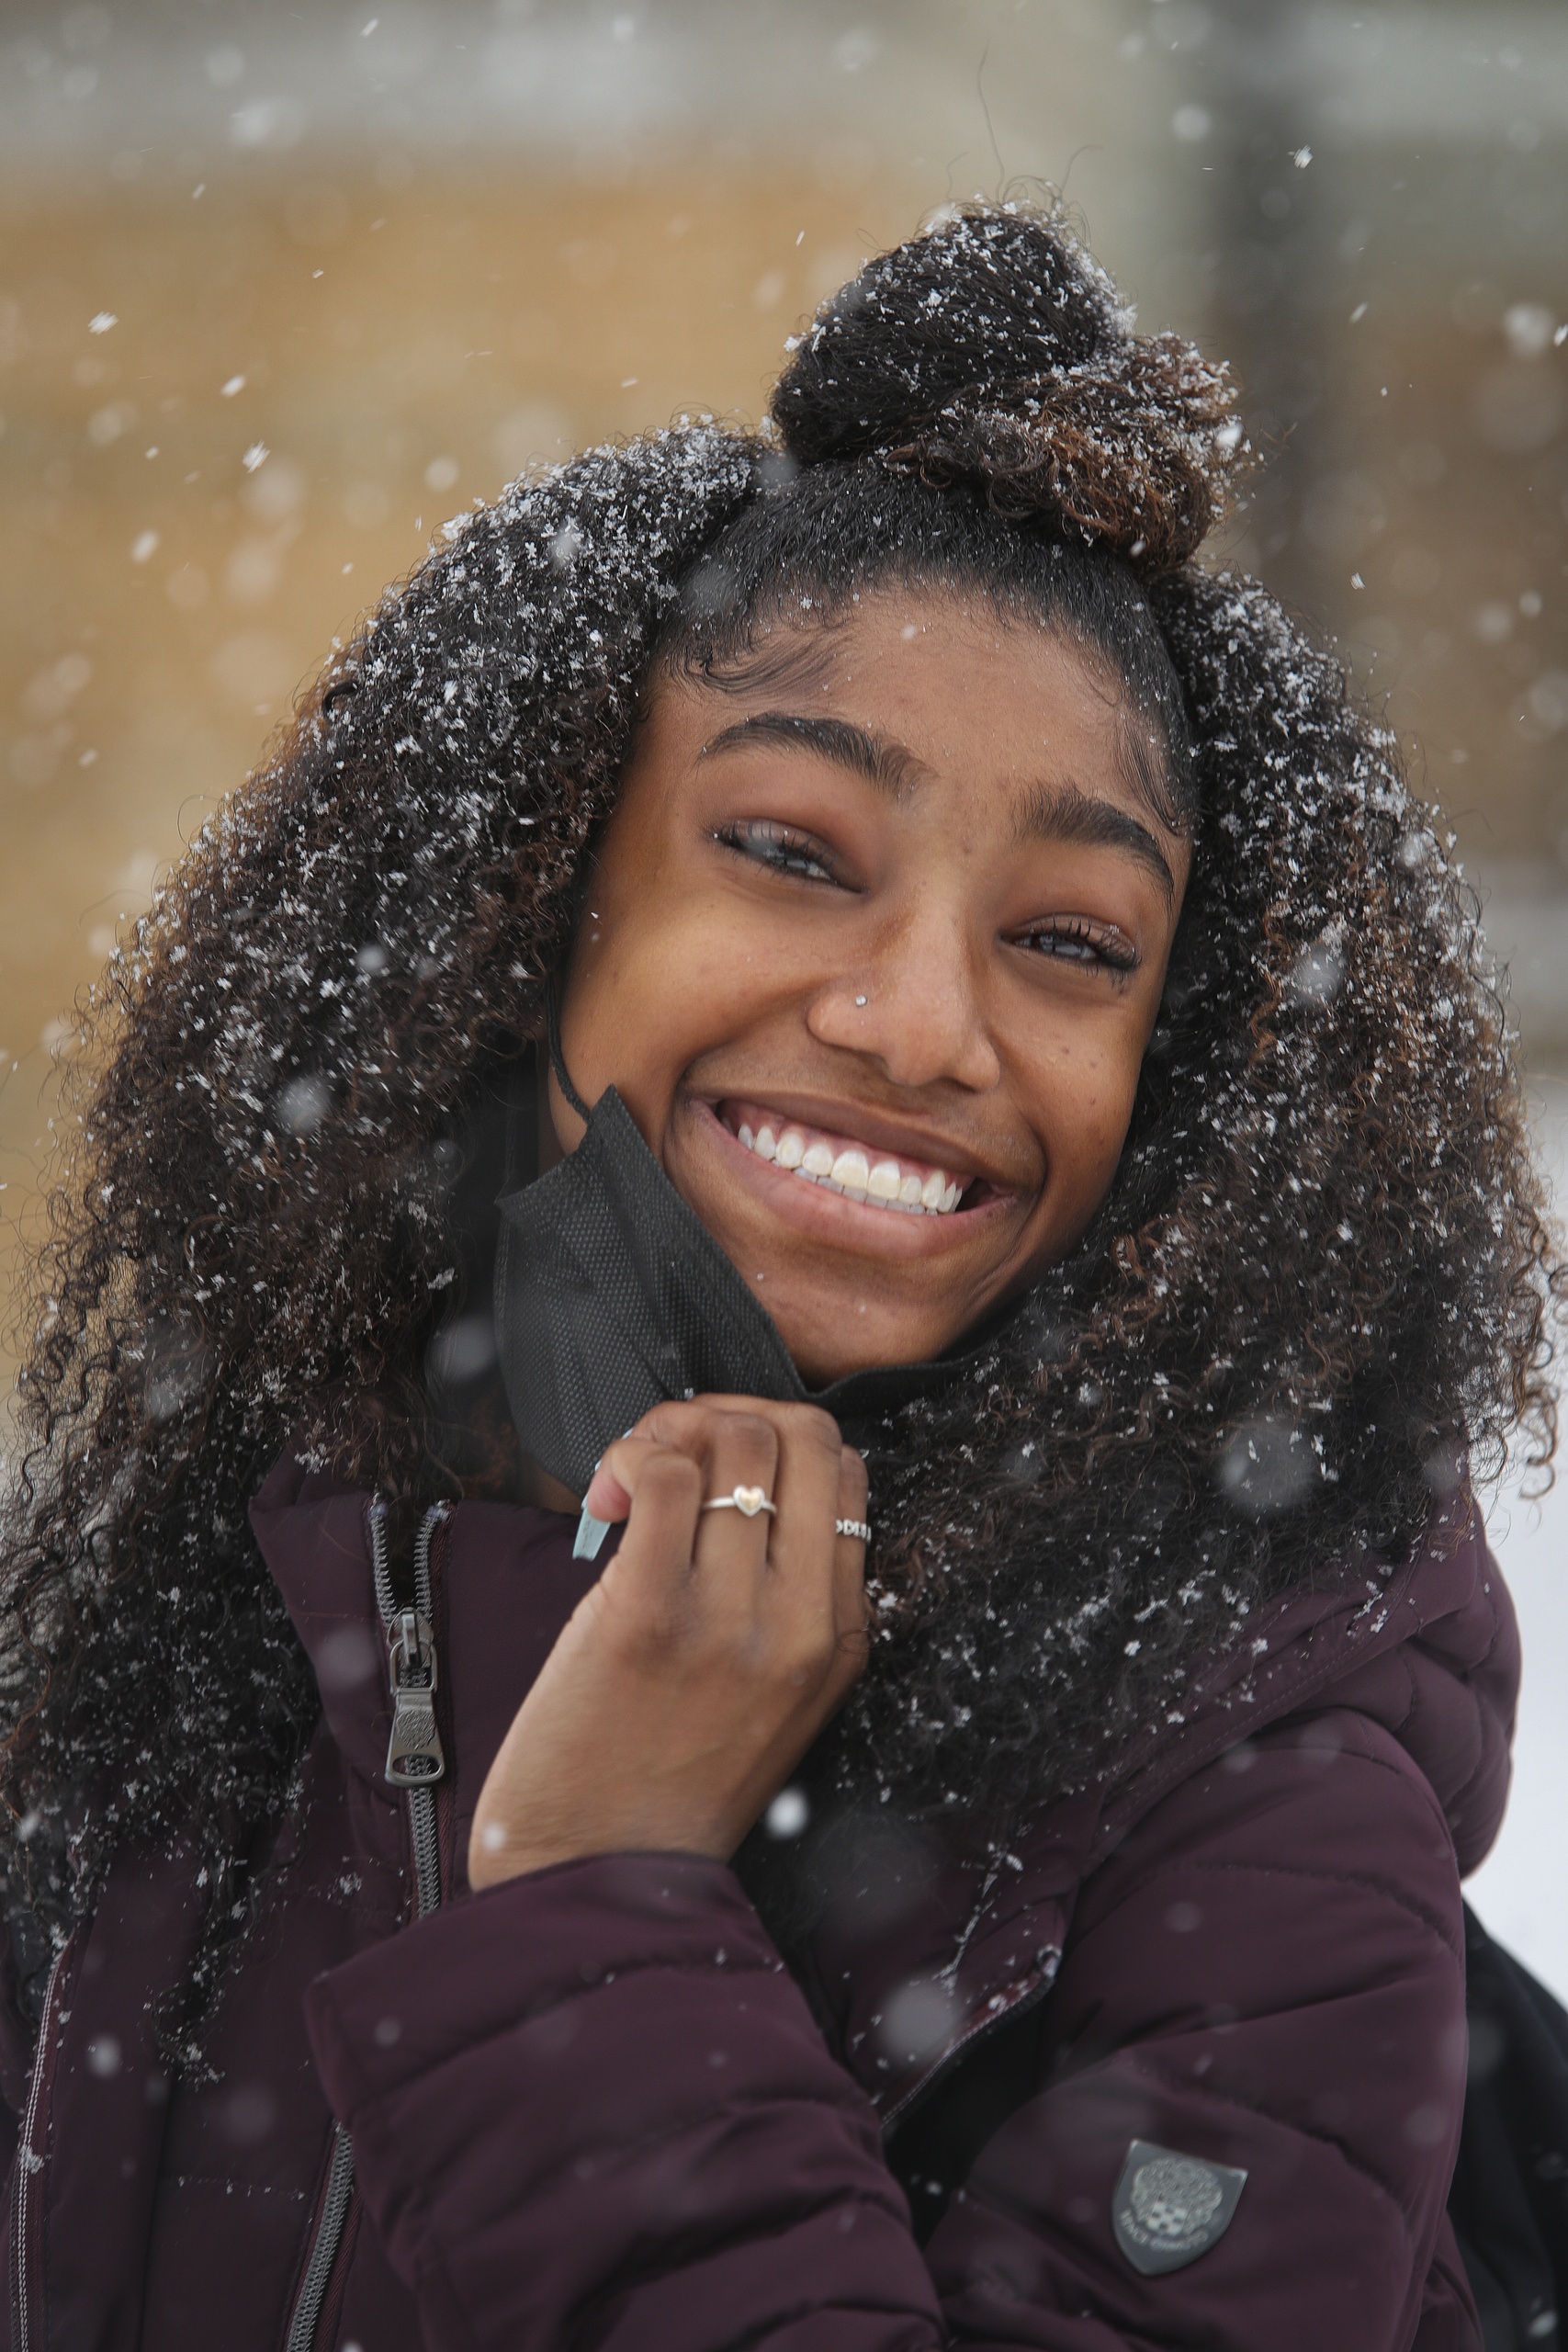 A student smiles, enjoying a chilly walk across campus.